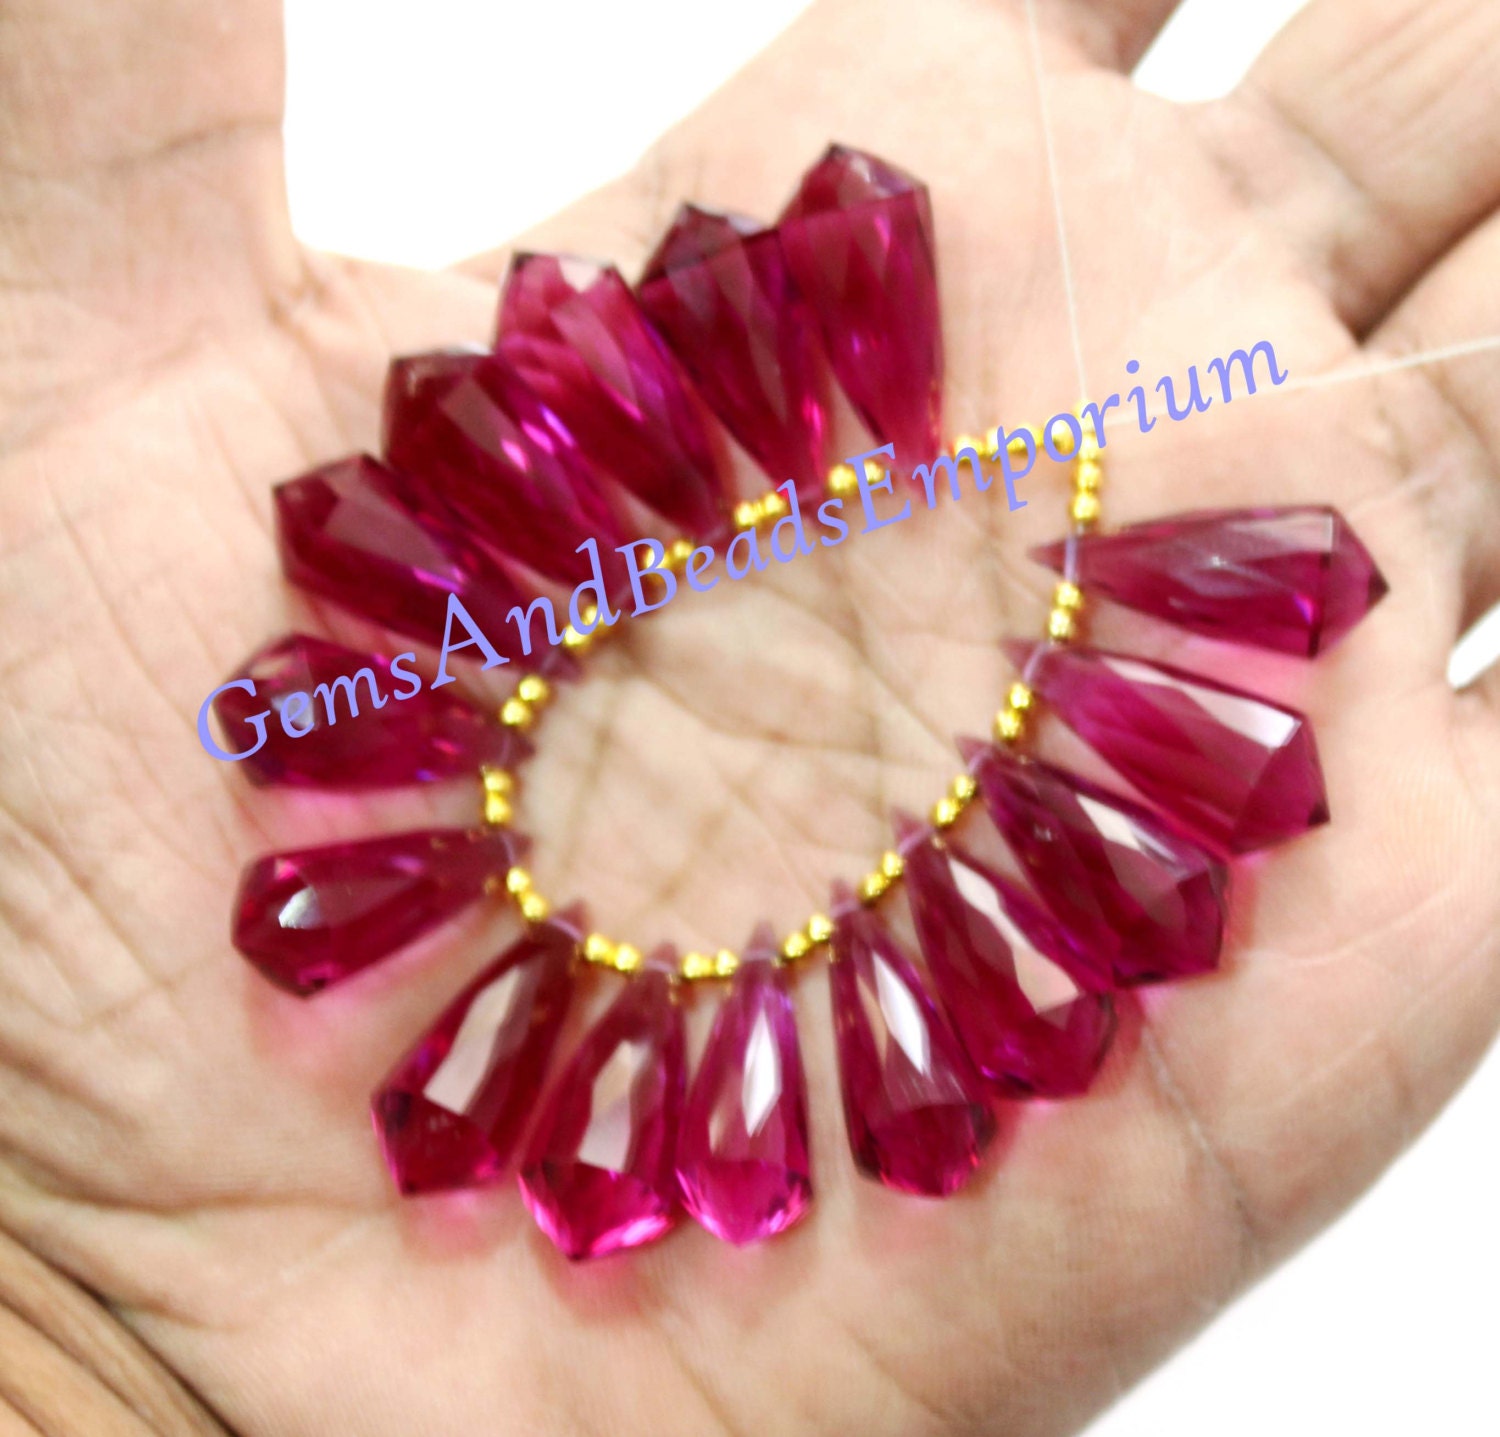 18 Pcs 24x10mm Aaa Rubellite Pink Quartz Faceted Chandelier Briolettes - Loose -Diy Jewelry Making Wire Wrapping -Earrings Pair